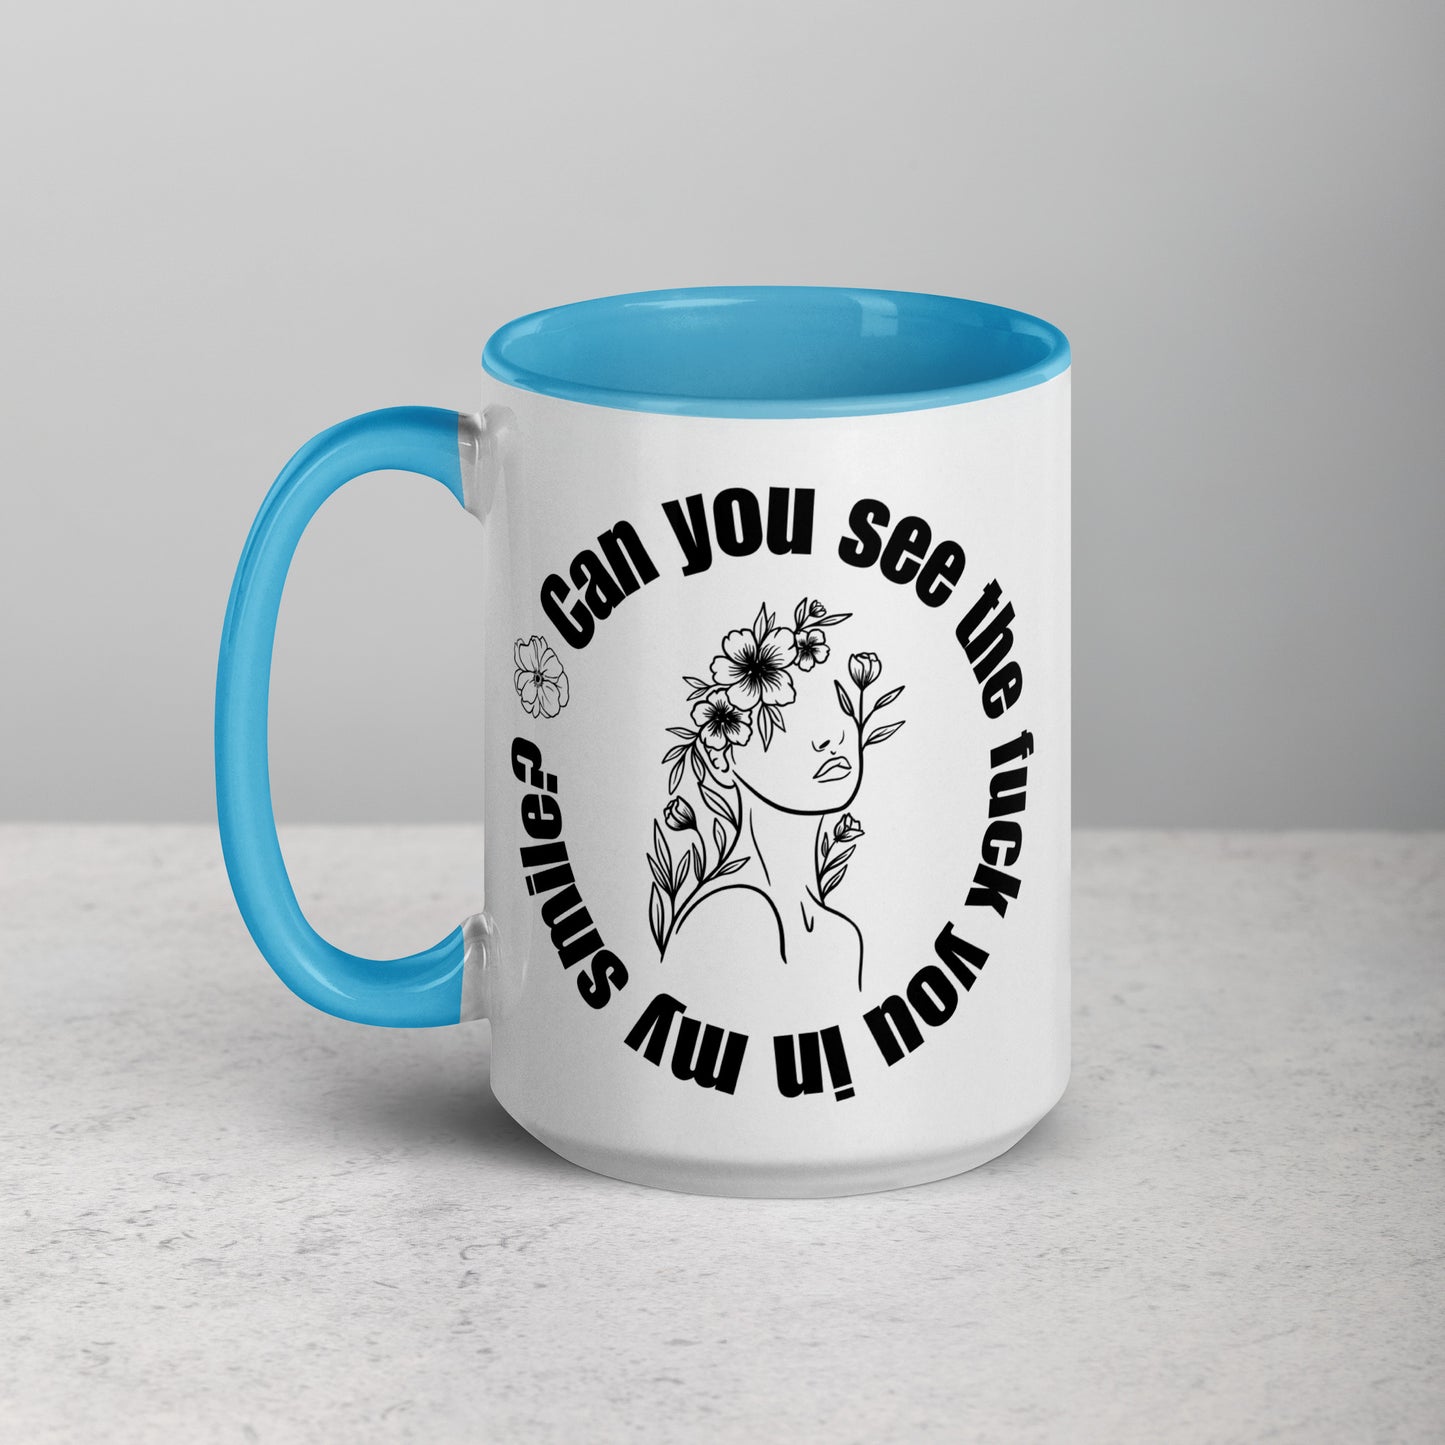 Do You See the Fuck You in My Smile White Ceramic Coffee Mug